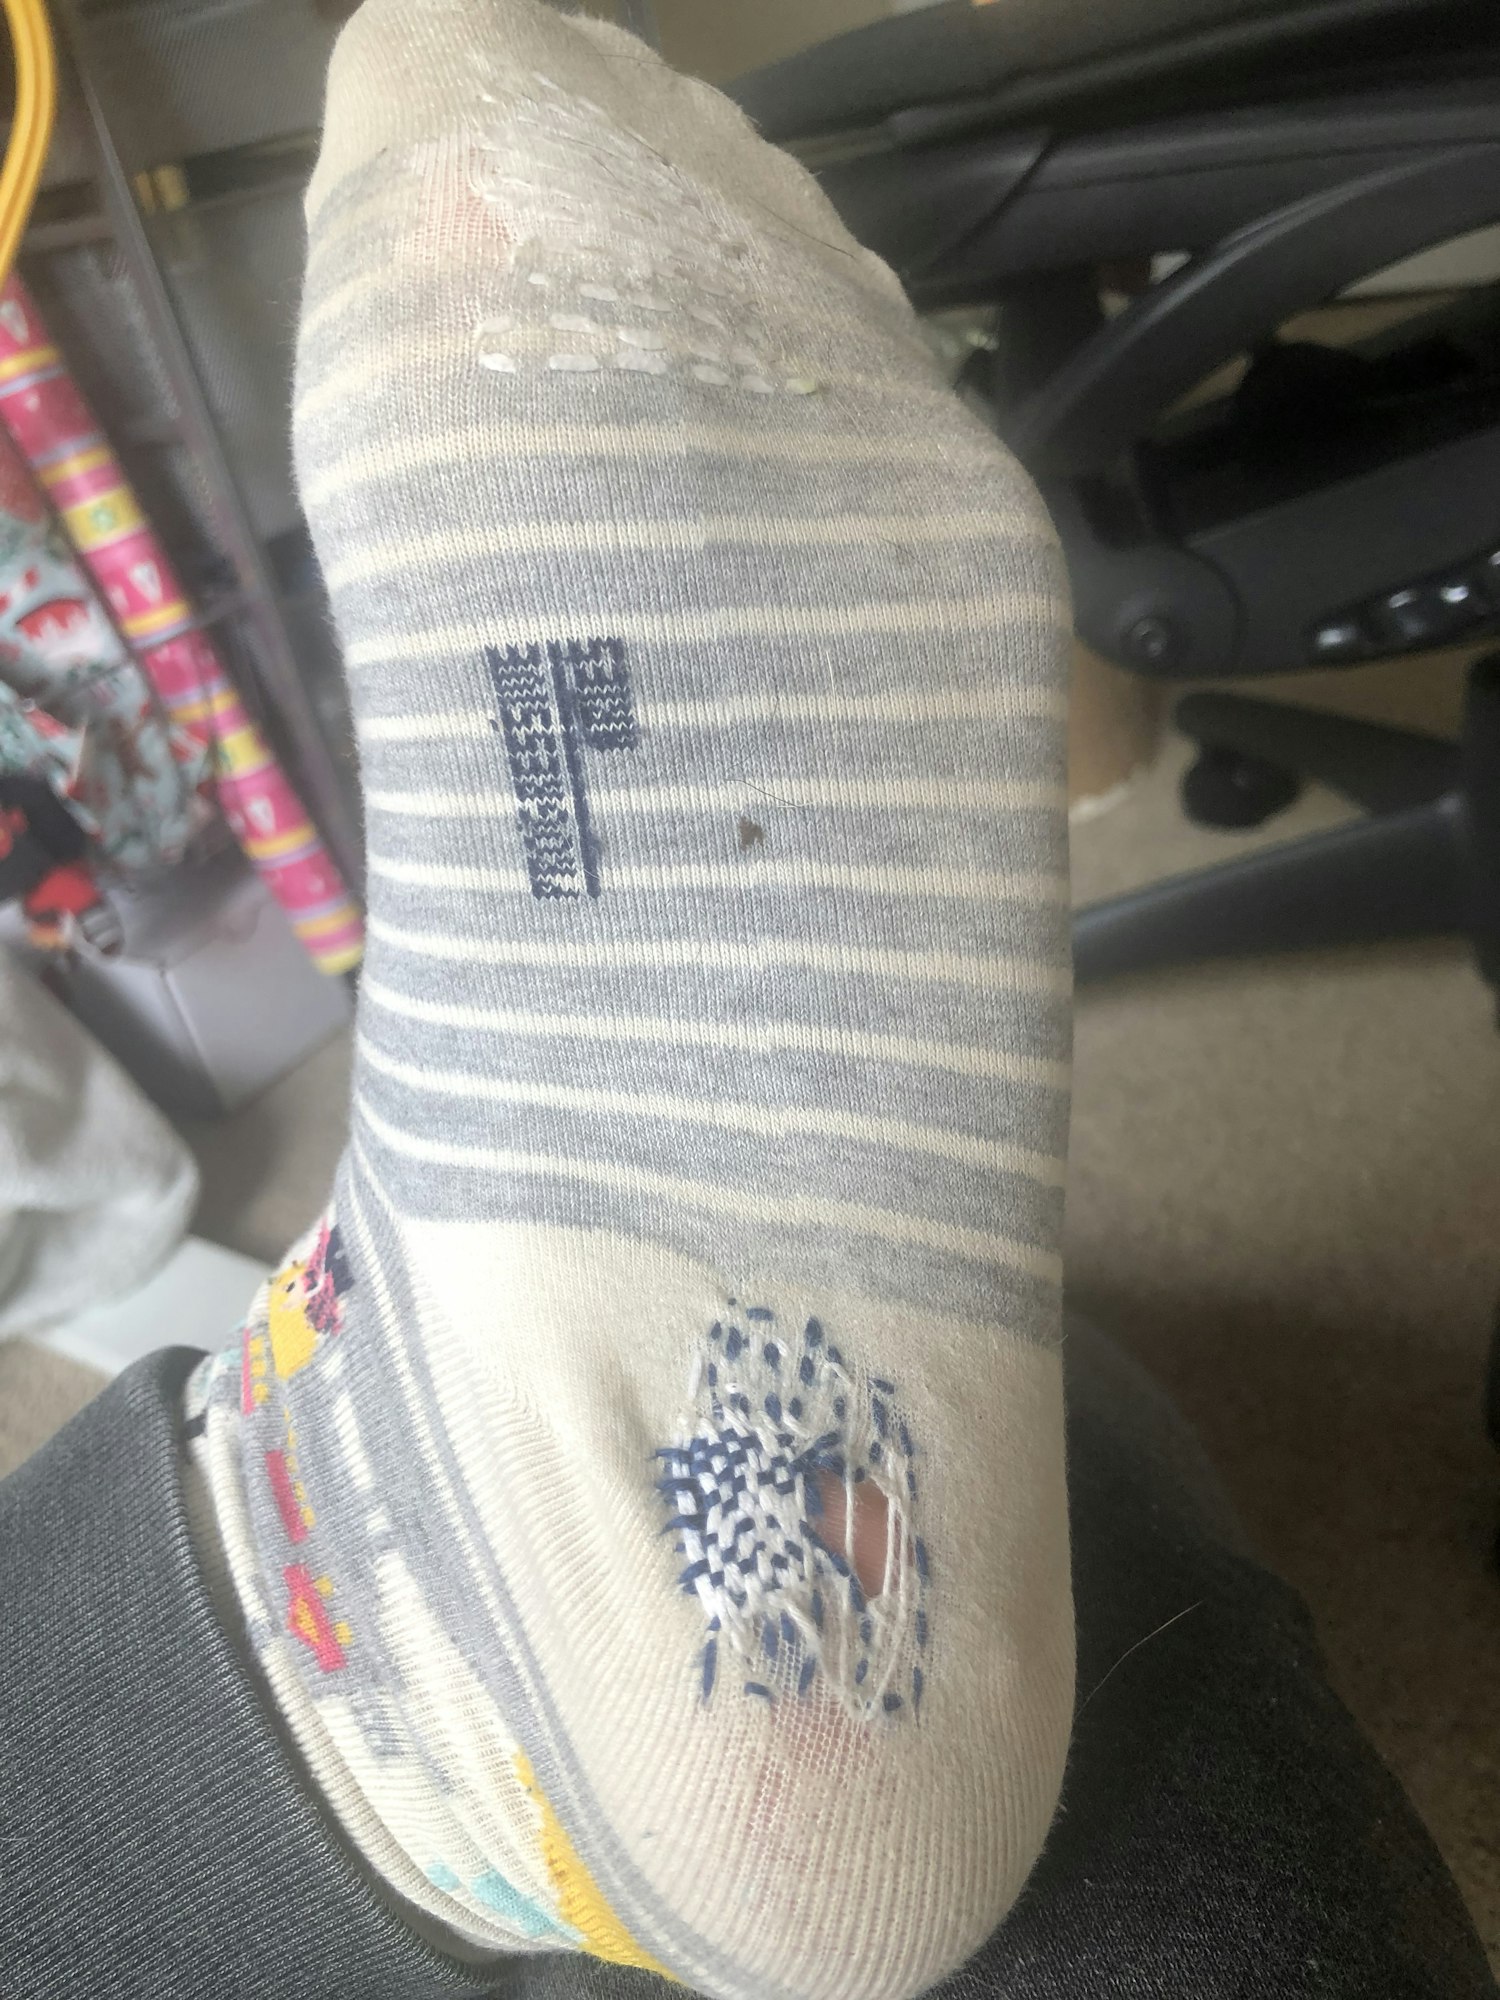 Mended socks with a hole using darning technique